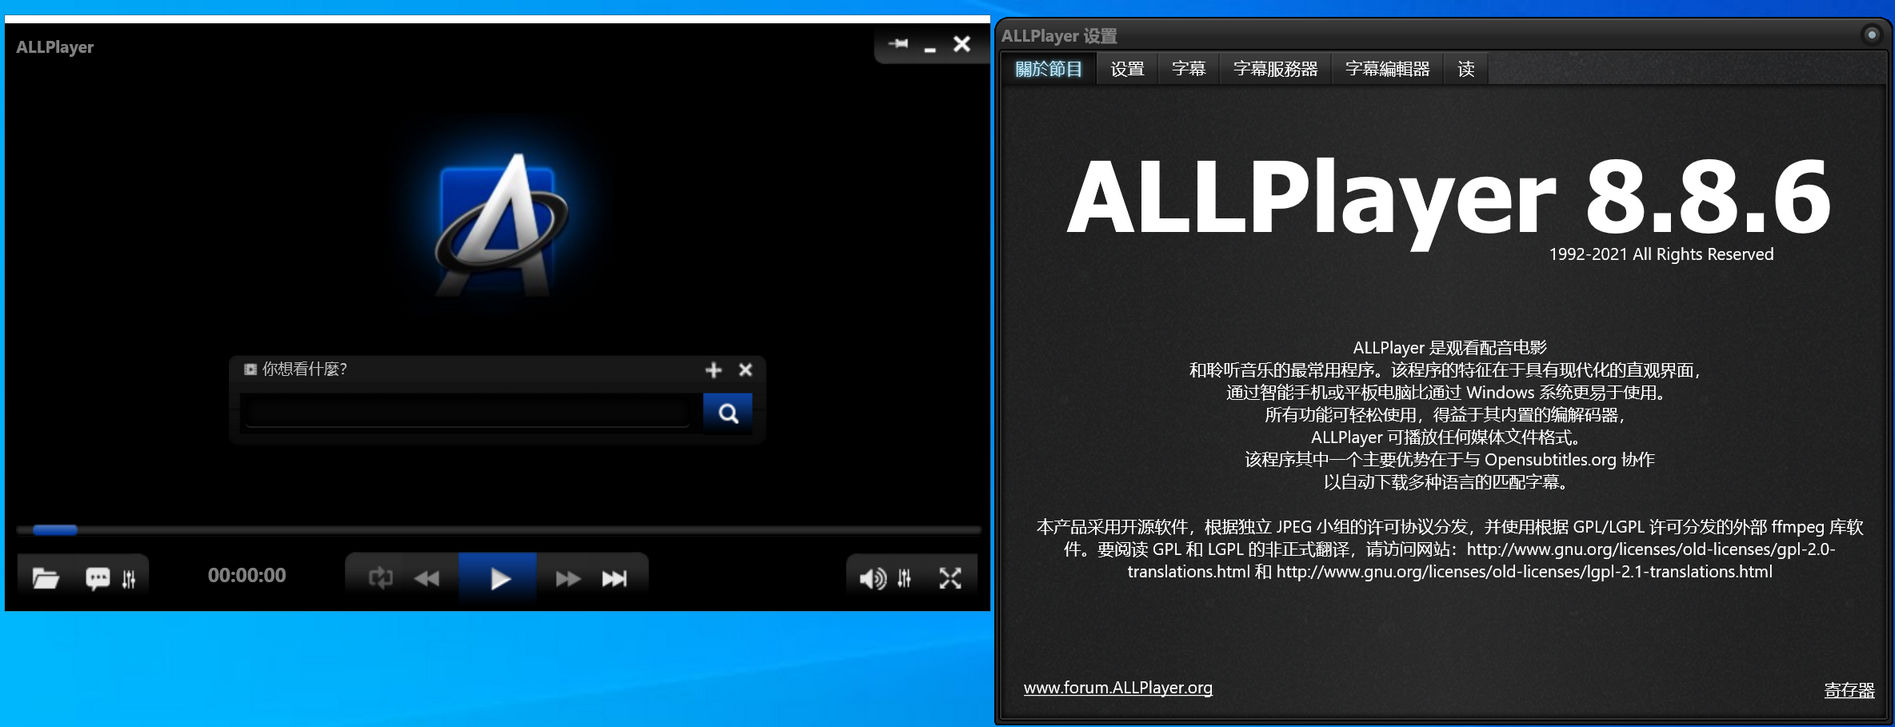 ALLPlayer 8.9.6 download the new for android